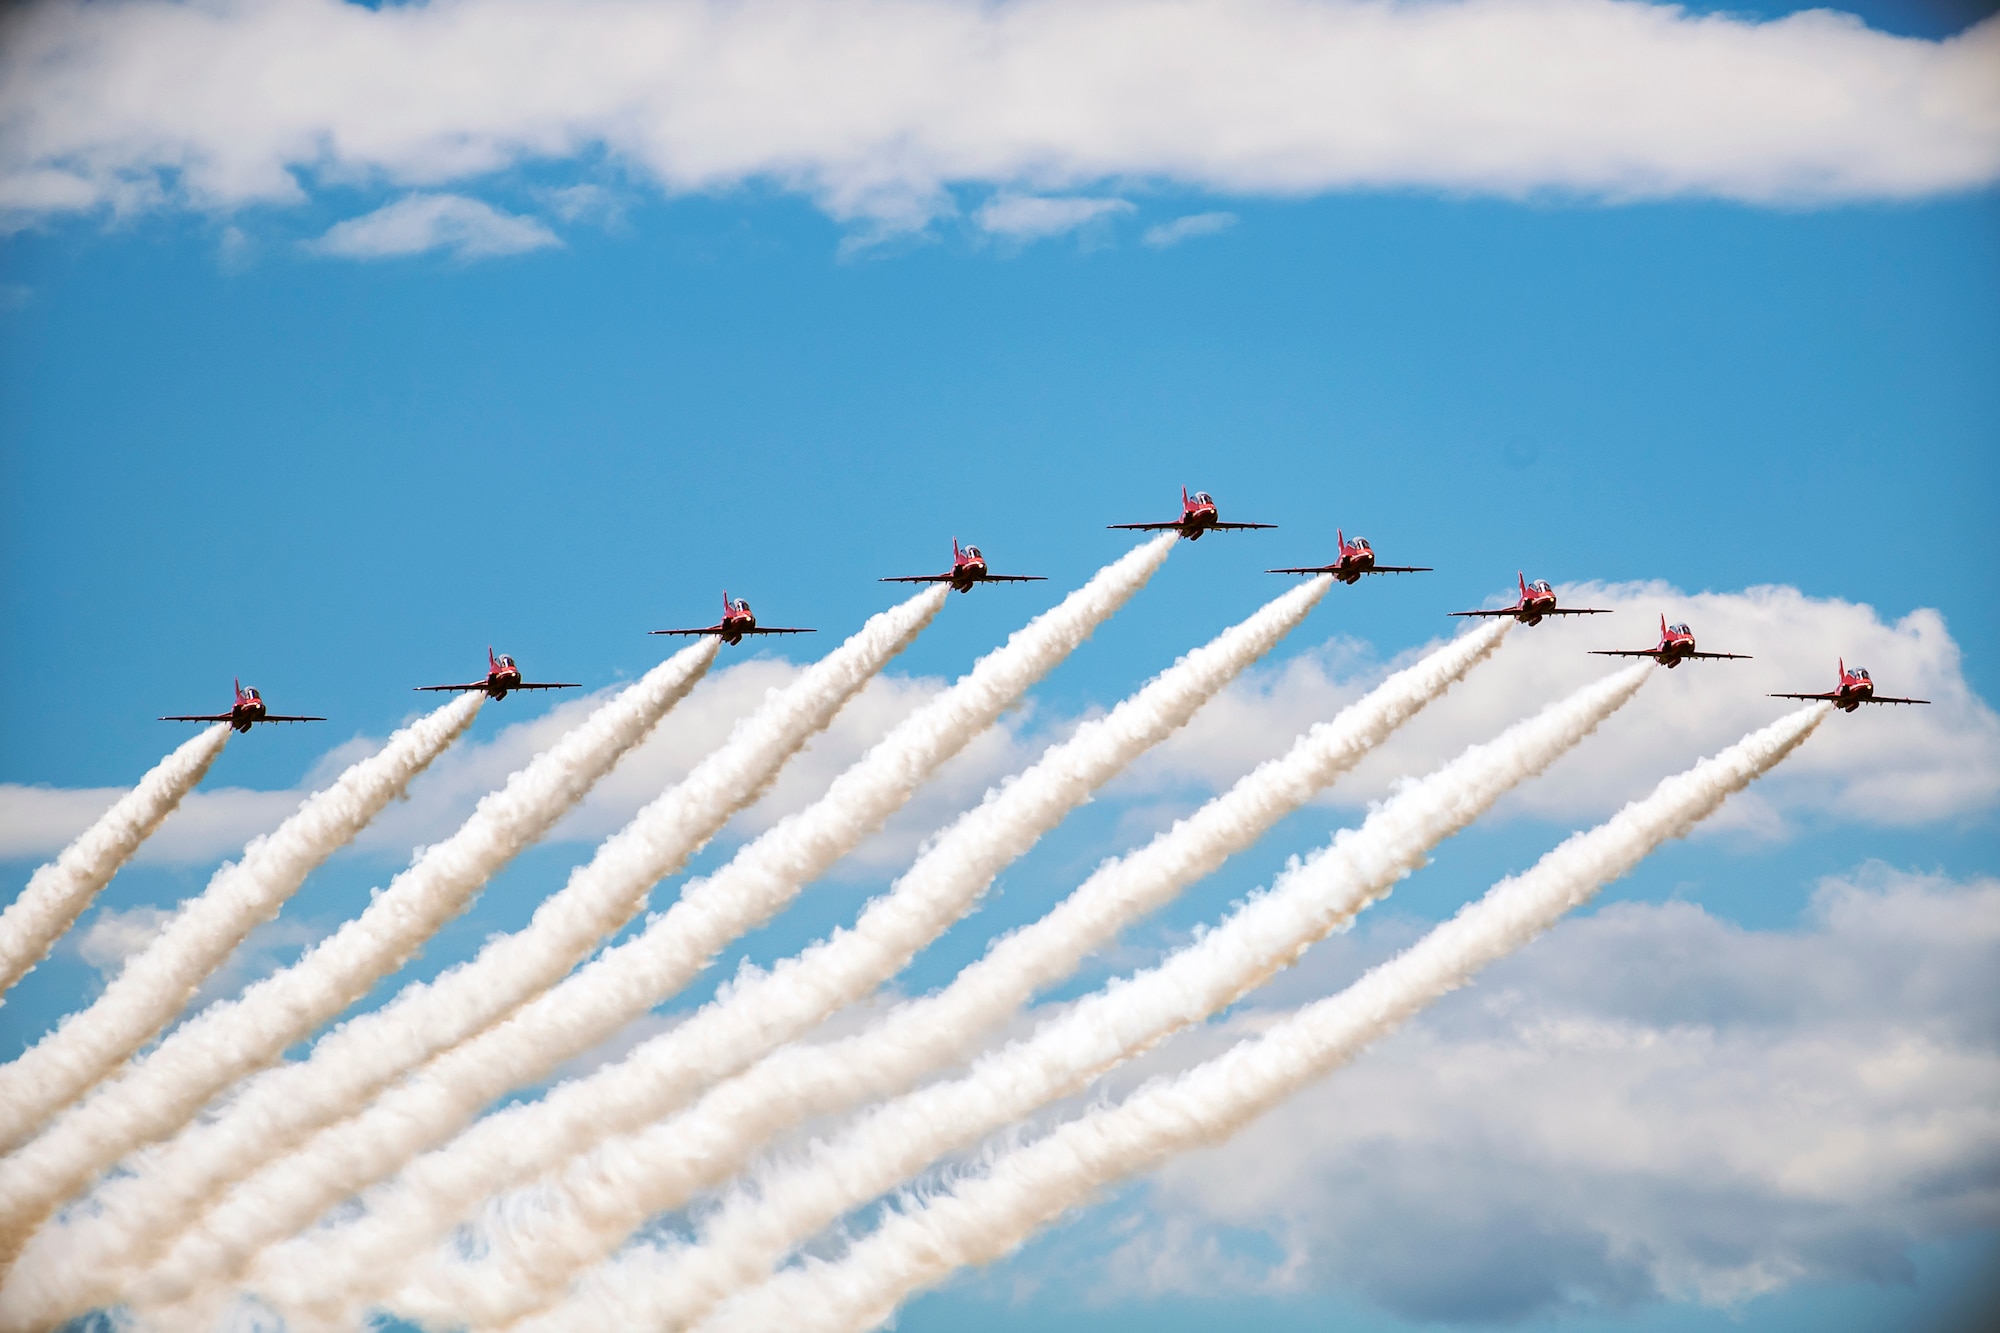 RAF Red Arrows refuel at Fairford > U.S. Forces in Europe & Air Forces Africa > Article Display